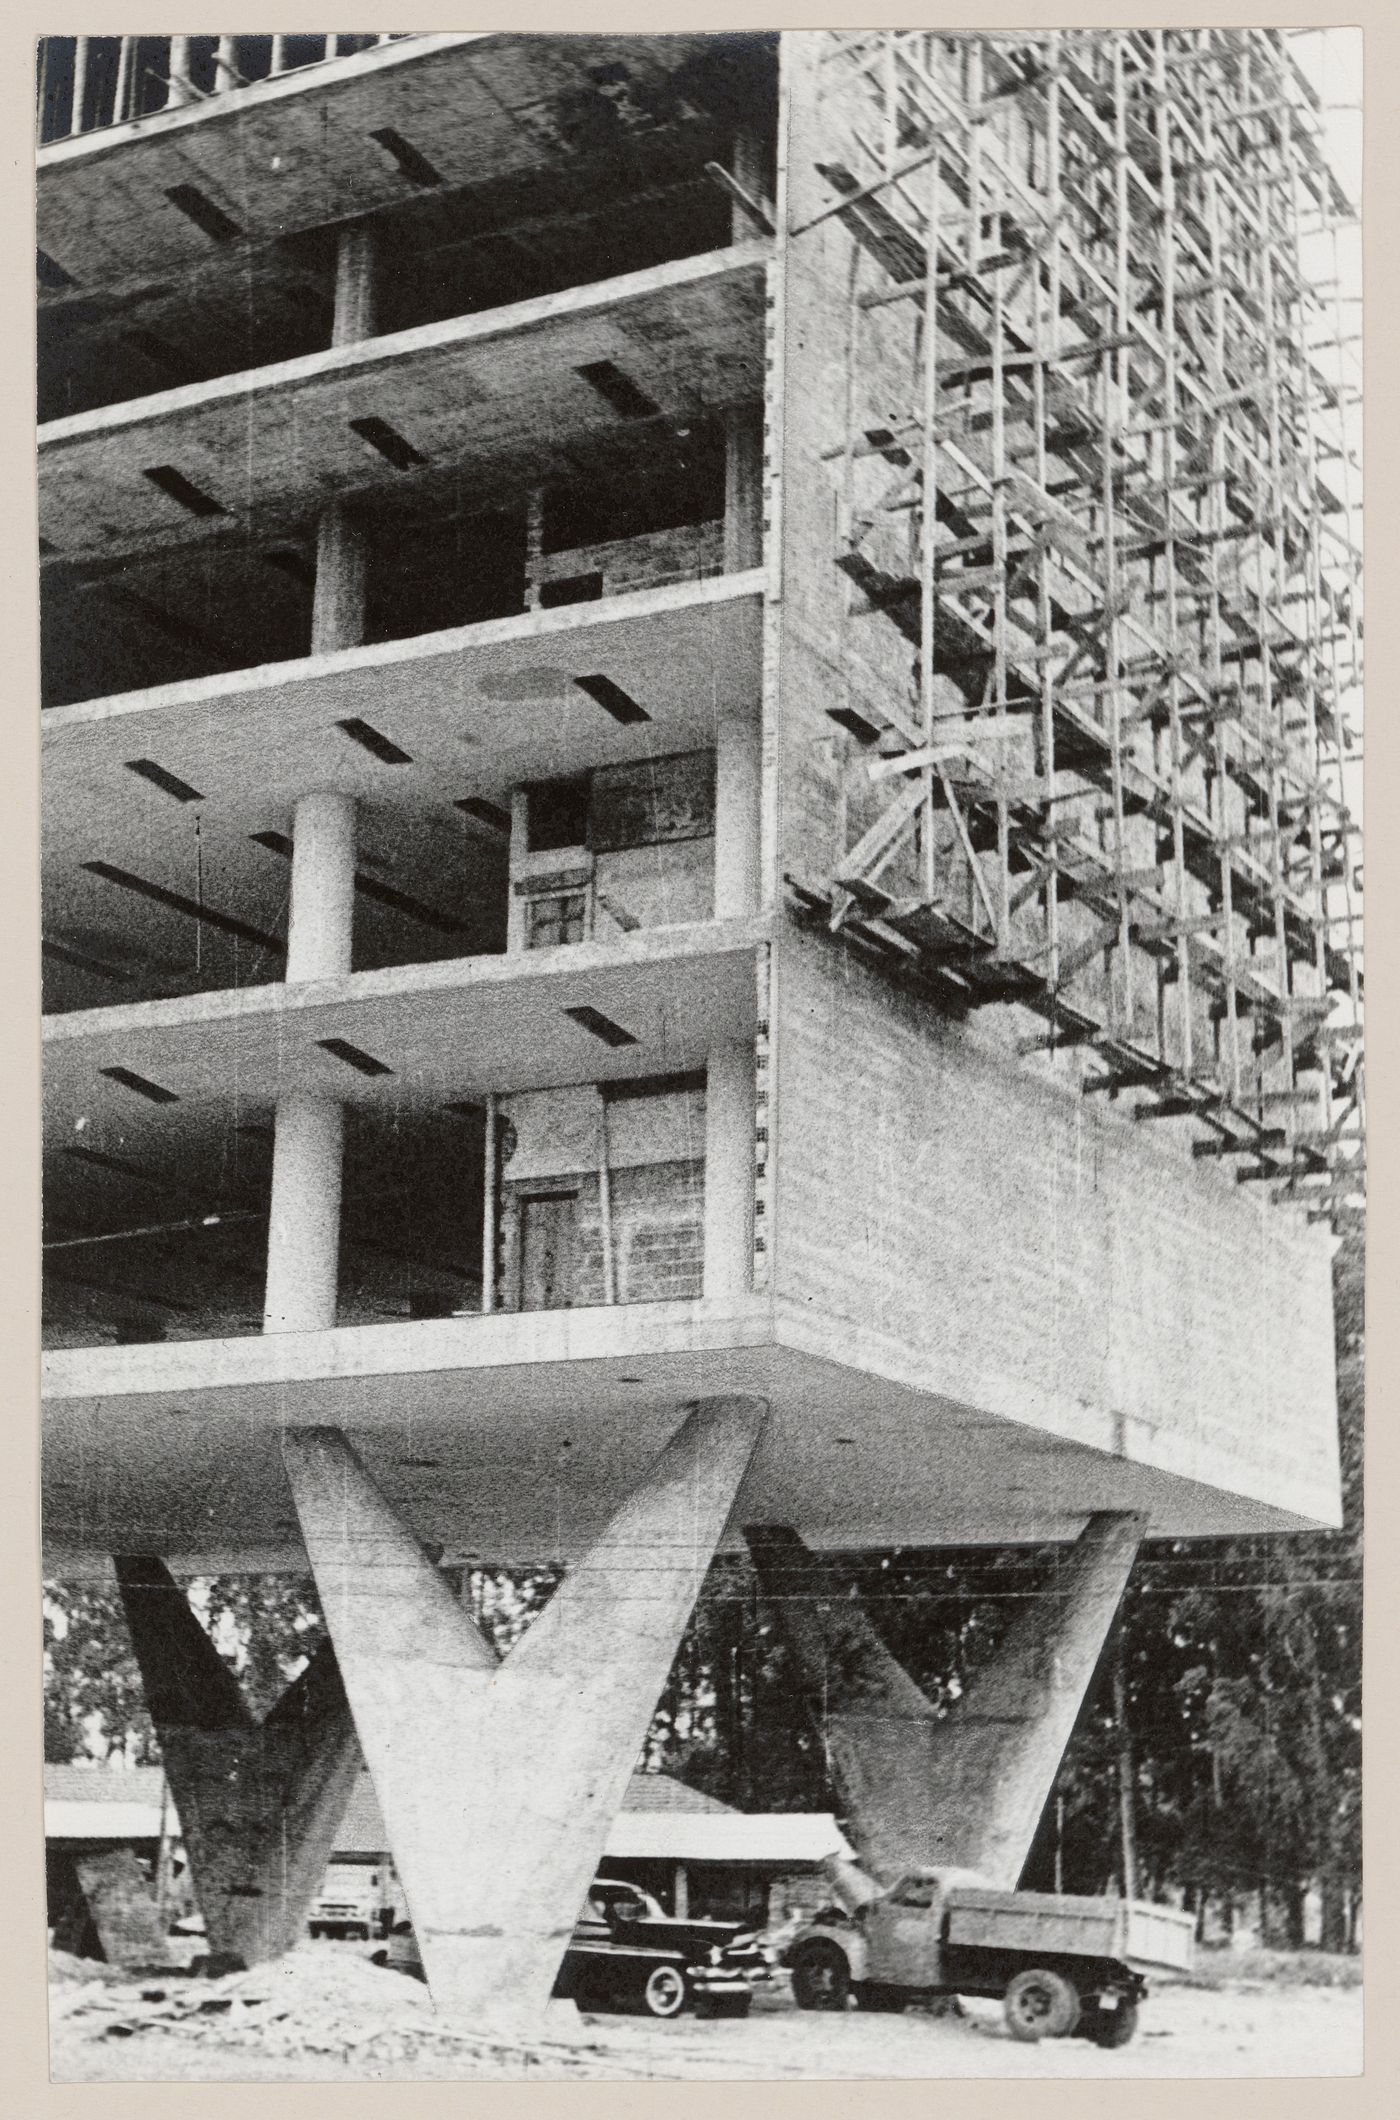 View of Palace of Agriculture under construction, São Paulo, Brazil
